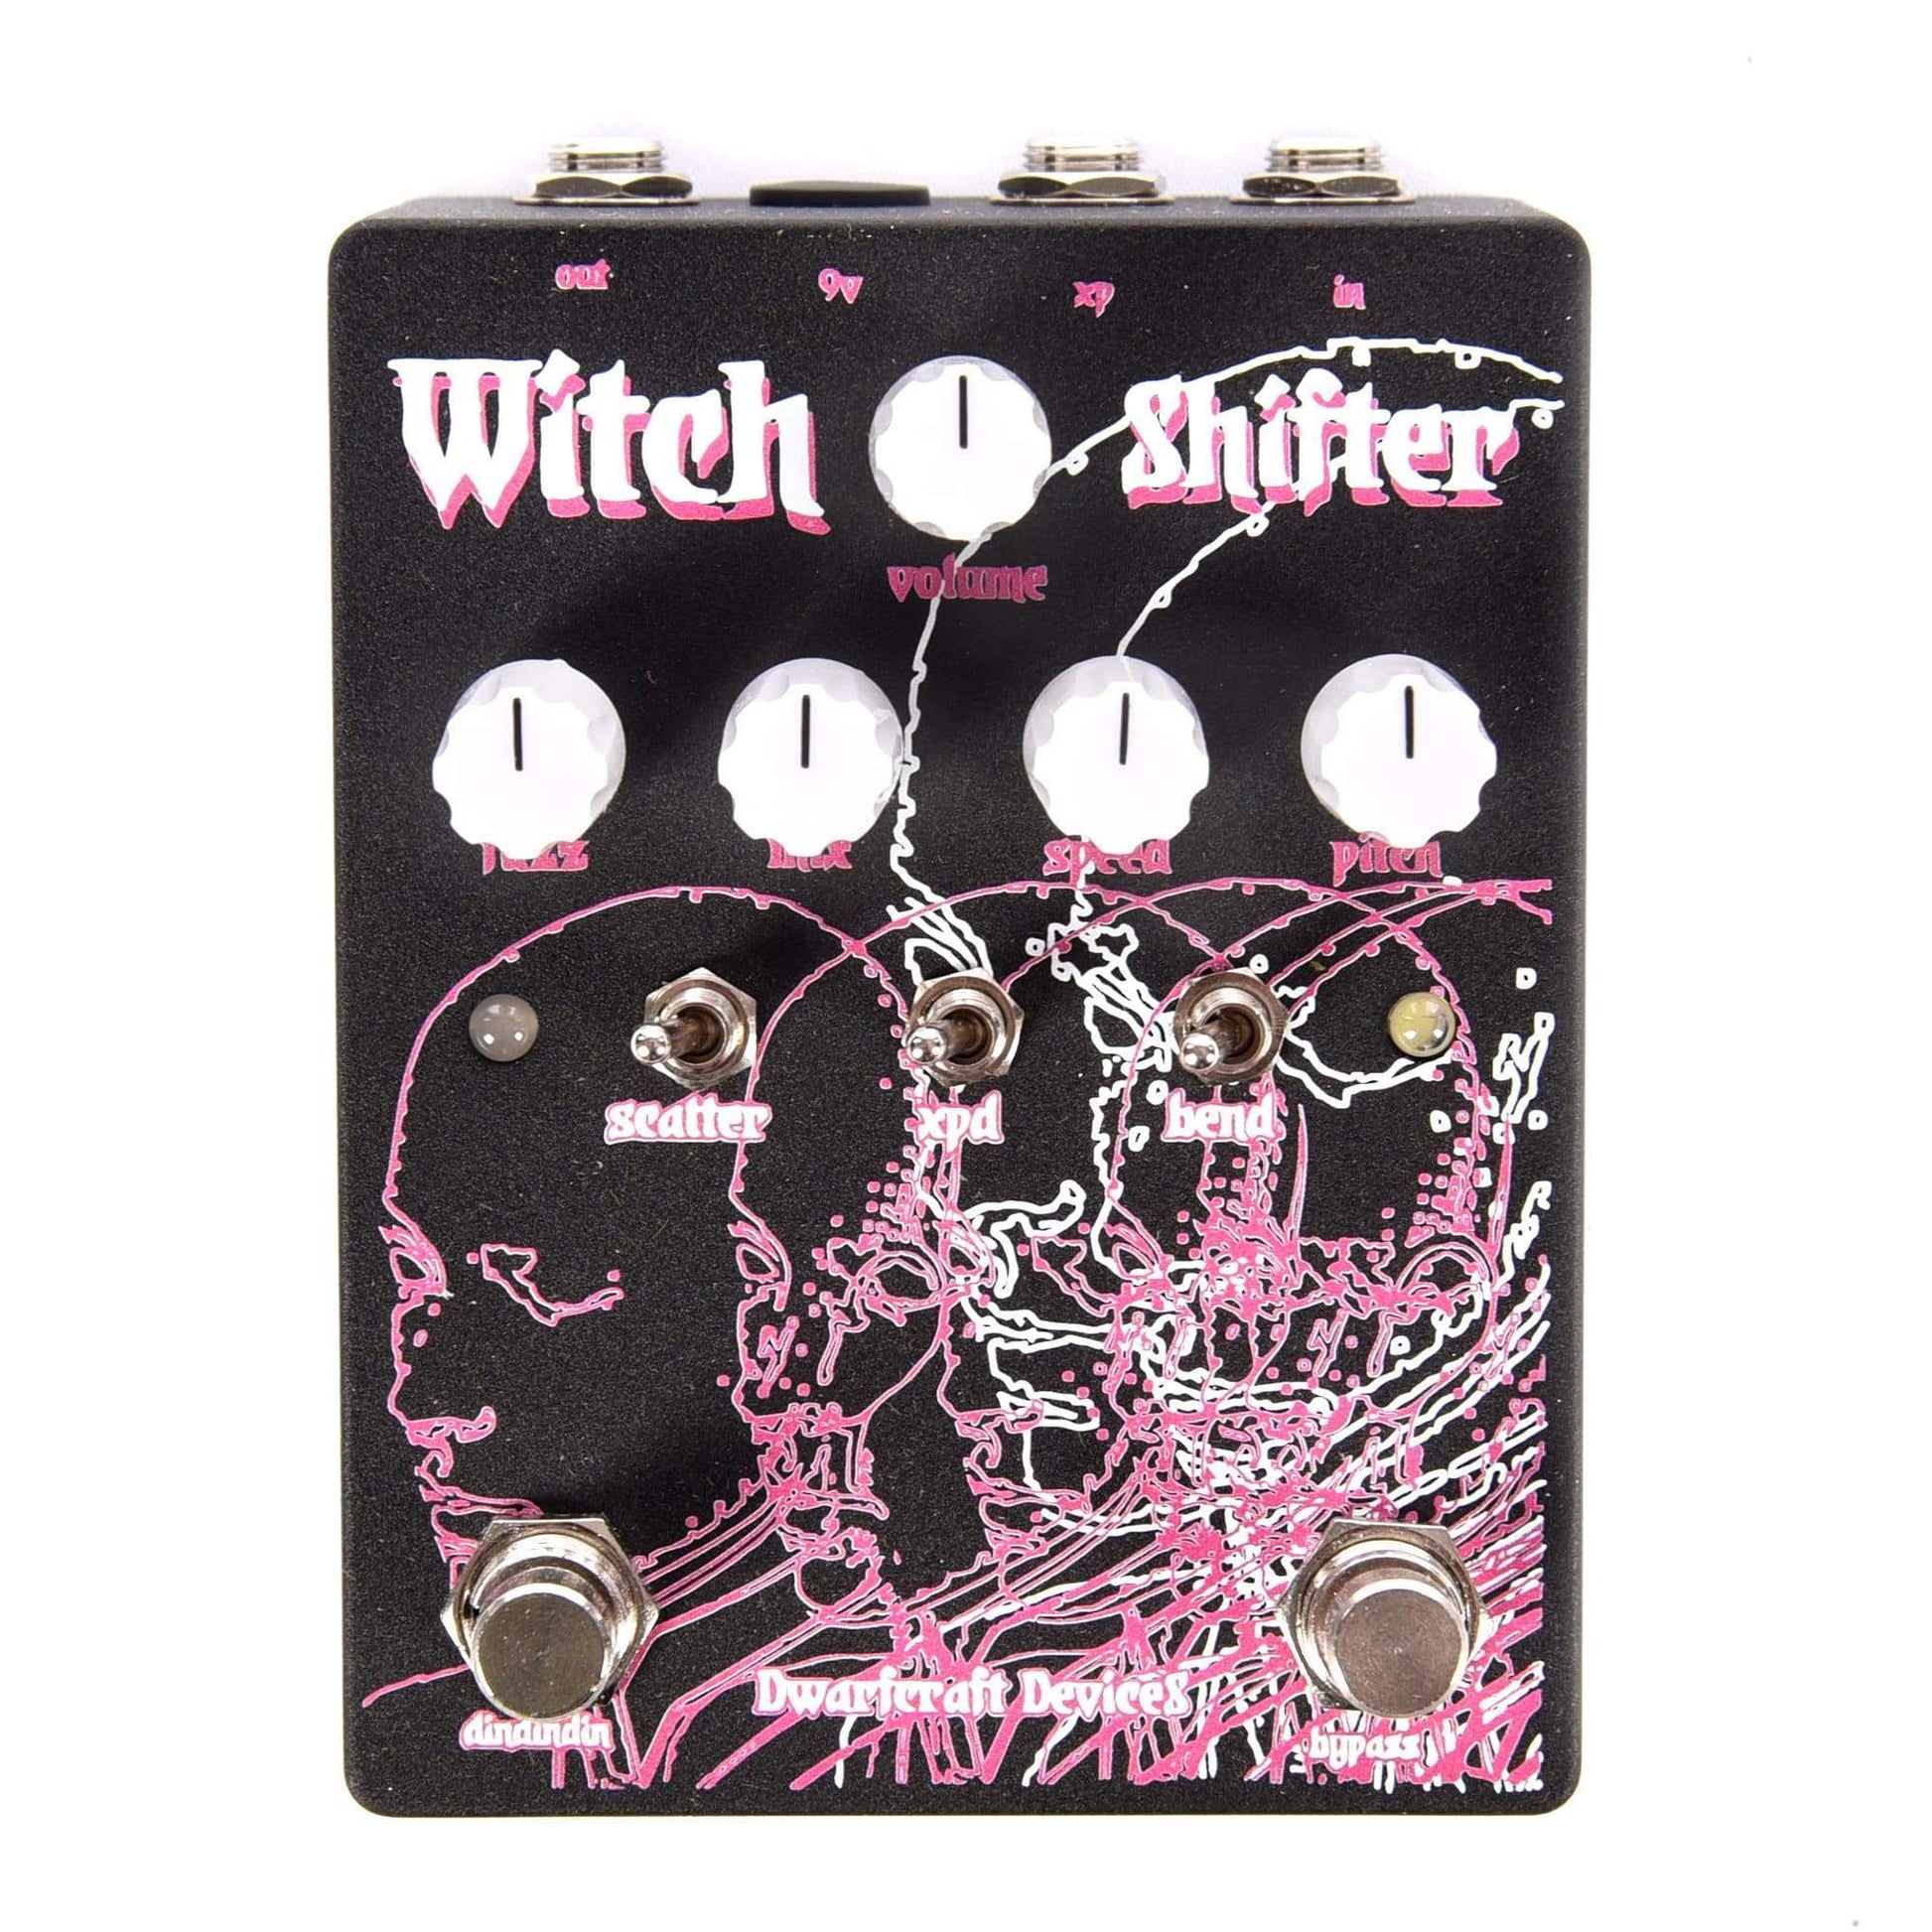 Dwarfcraft Devices Witch Shifter Pitch Shifter Effects and Pedals / Octave and Pitch